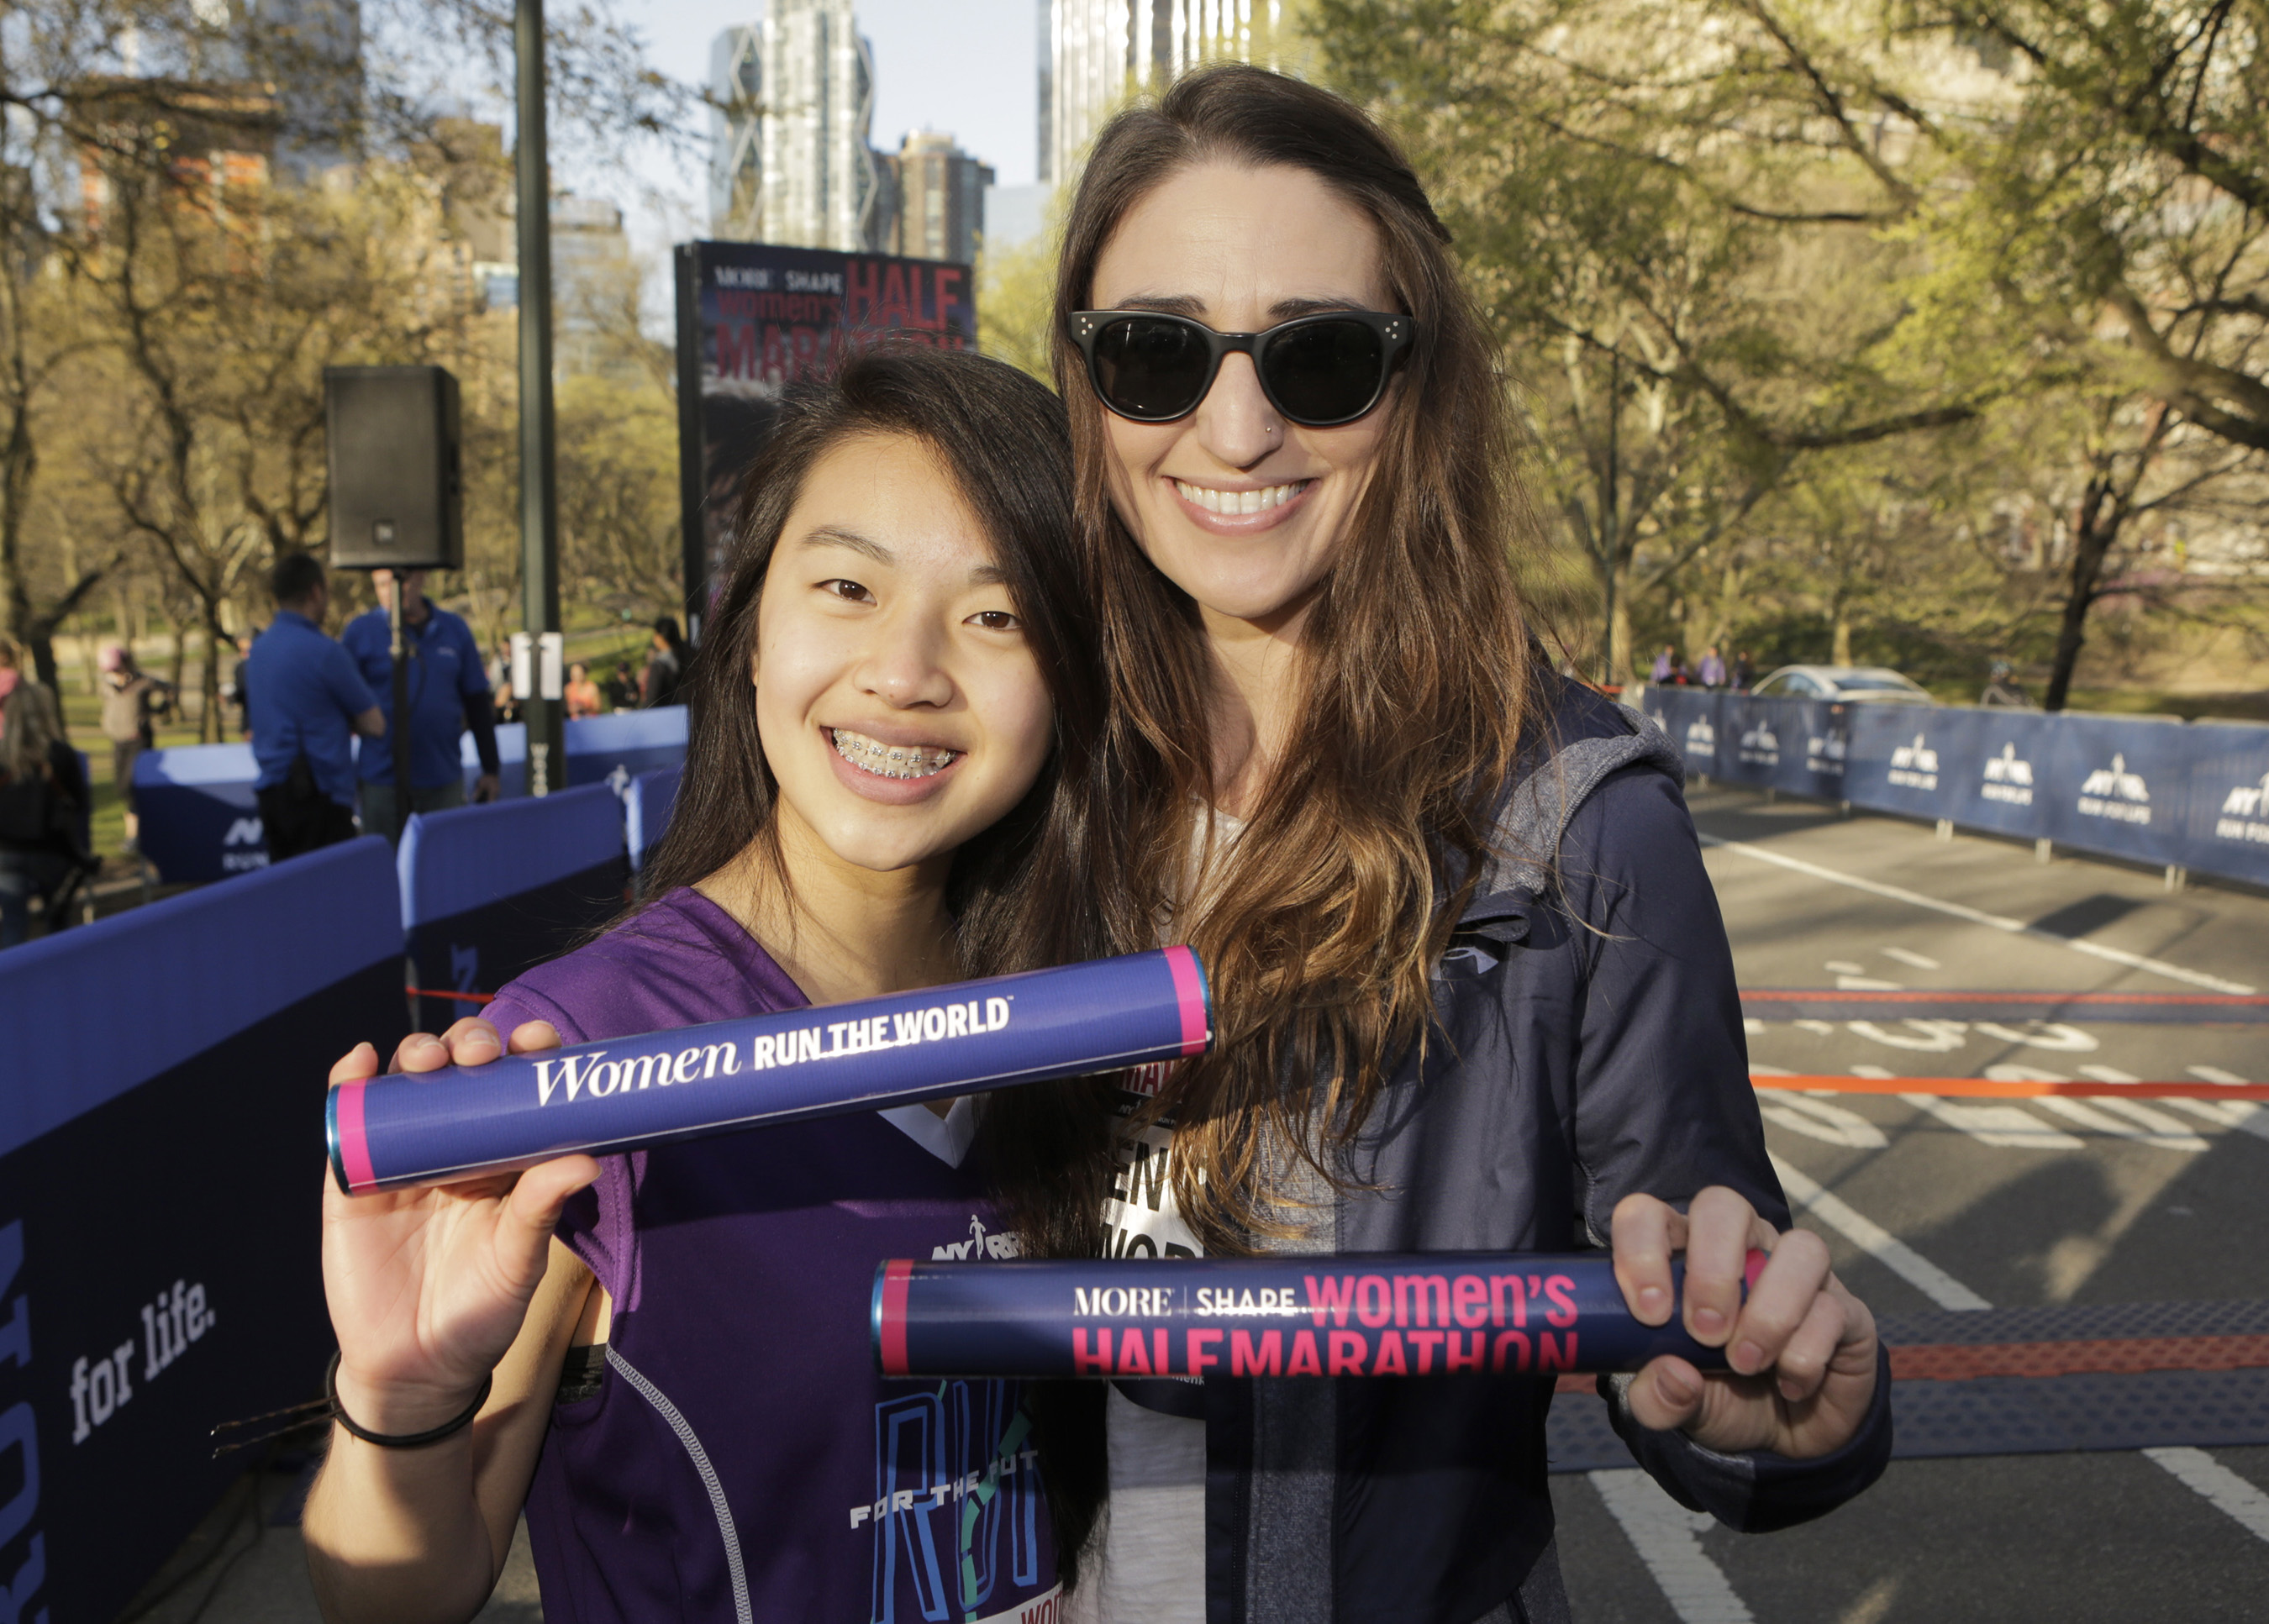 Singer Sara Bareilles and her mentee Kimberly Dao from NYRR’s Run for the Future program kick off the Women Run The World Relay at the start line of the 2016 MORE/SHAPE Women’s Half-Marathon on April 17.